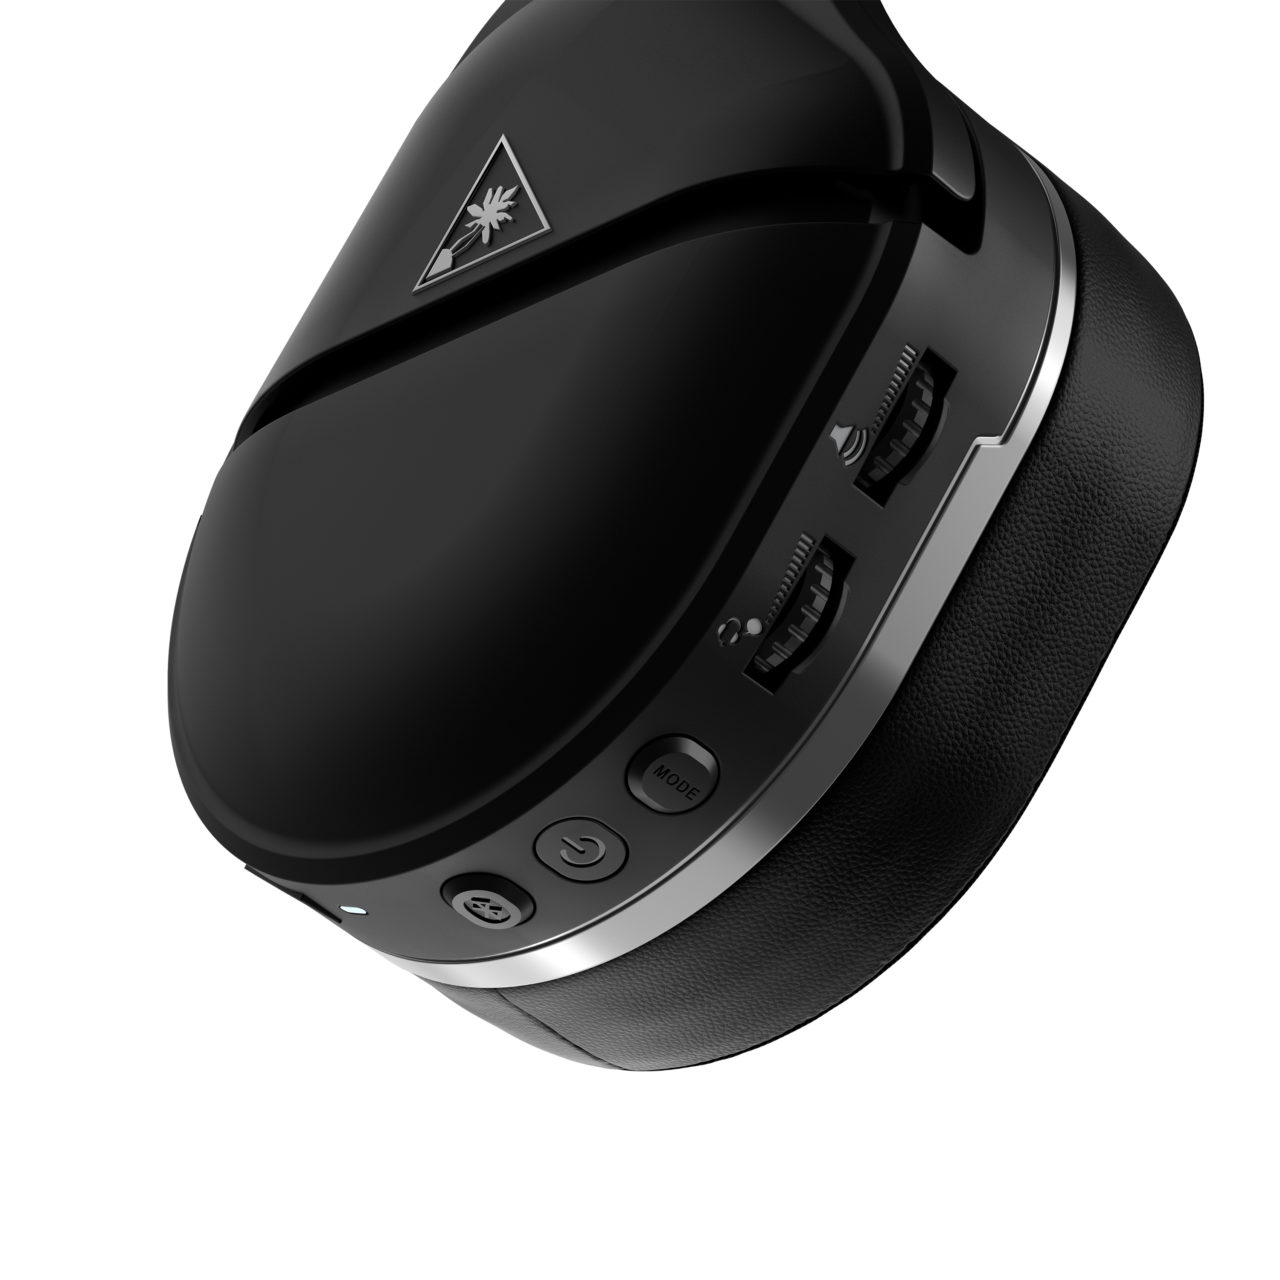 Turtle Beach Stealth 700 Gen 2 Max product image (Turtle Beach)